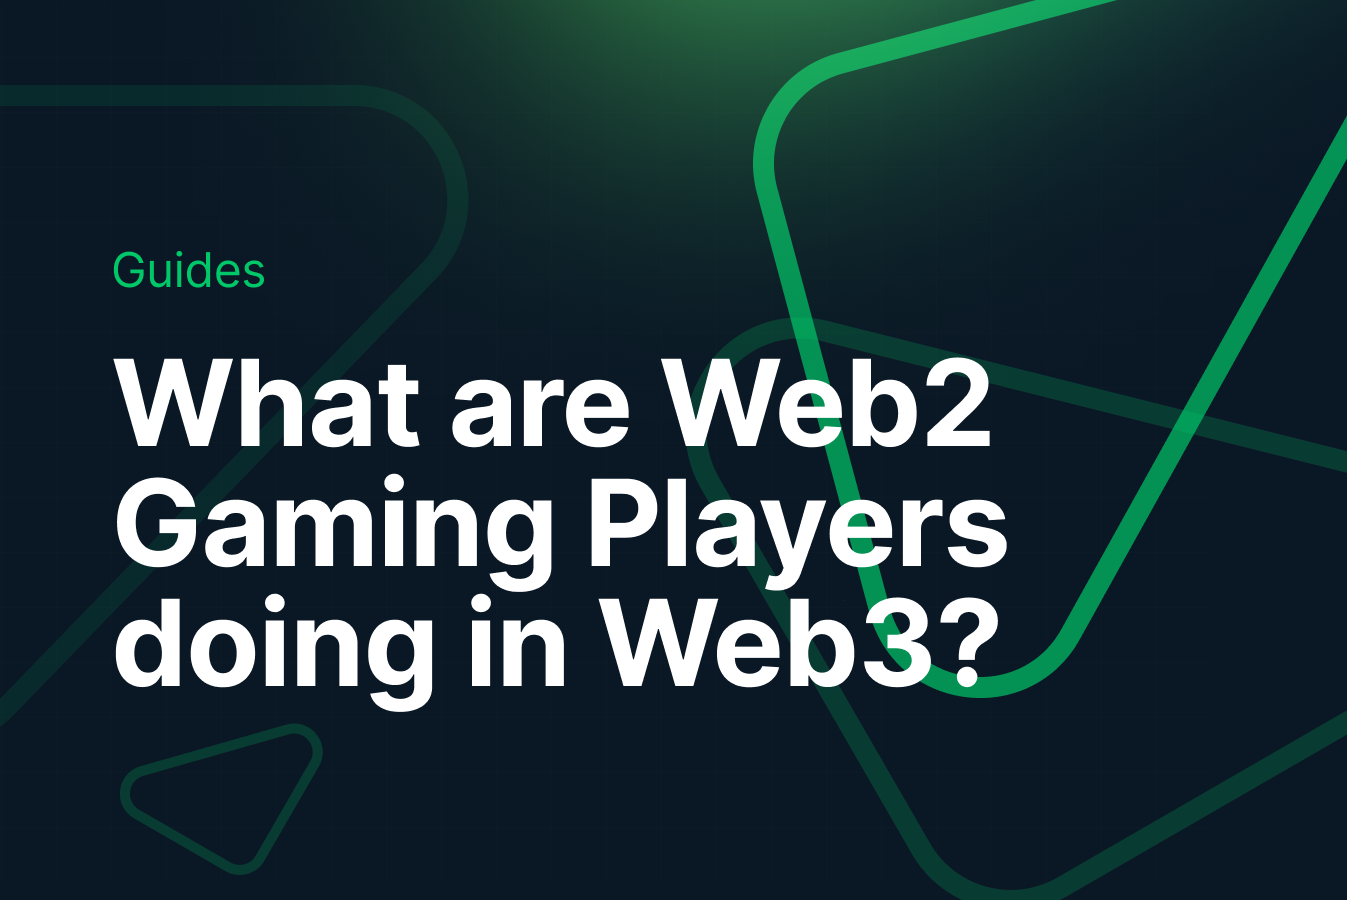 What are Leading Web2 Gaming Players doing in Web3?